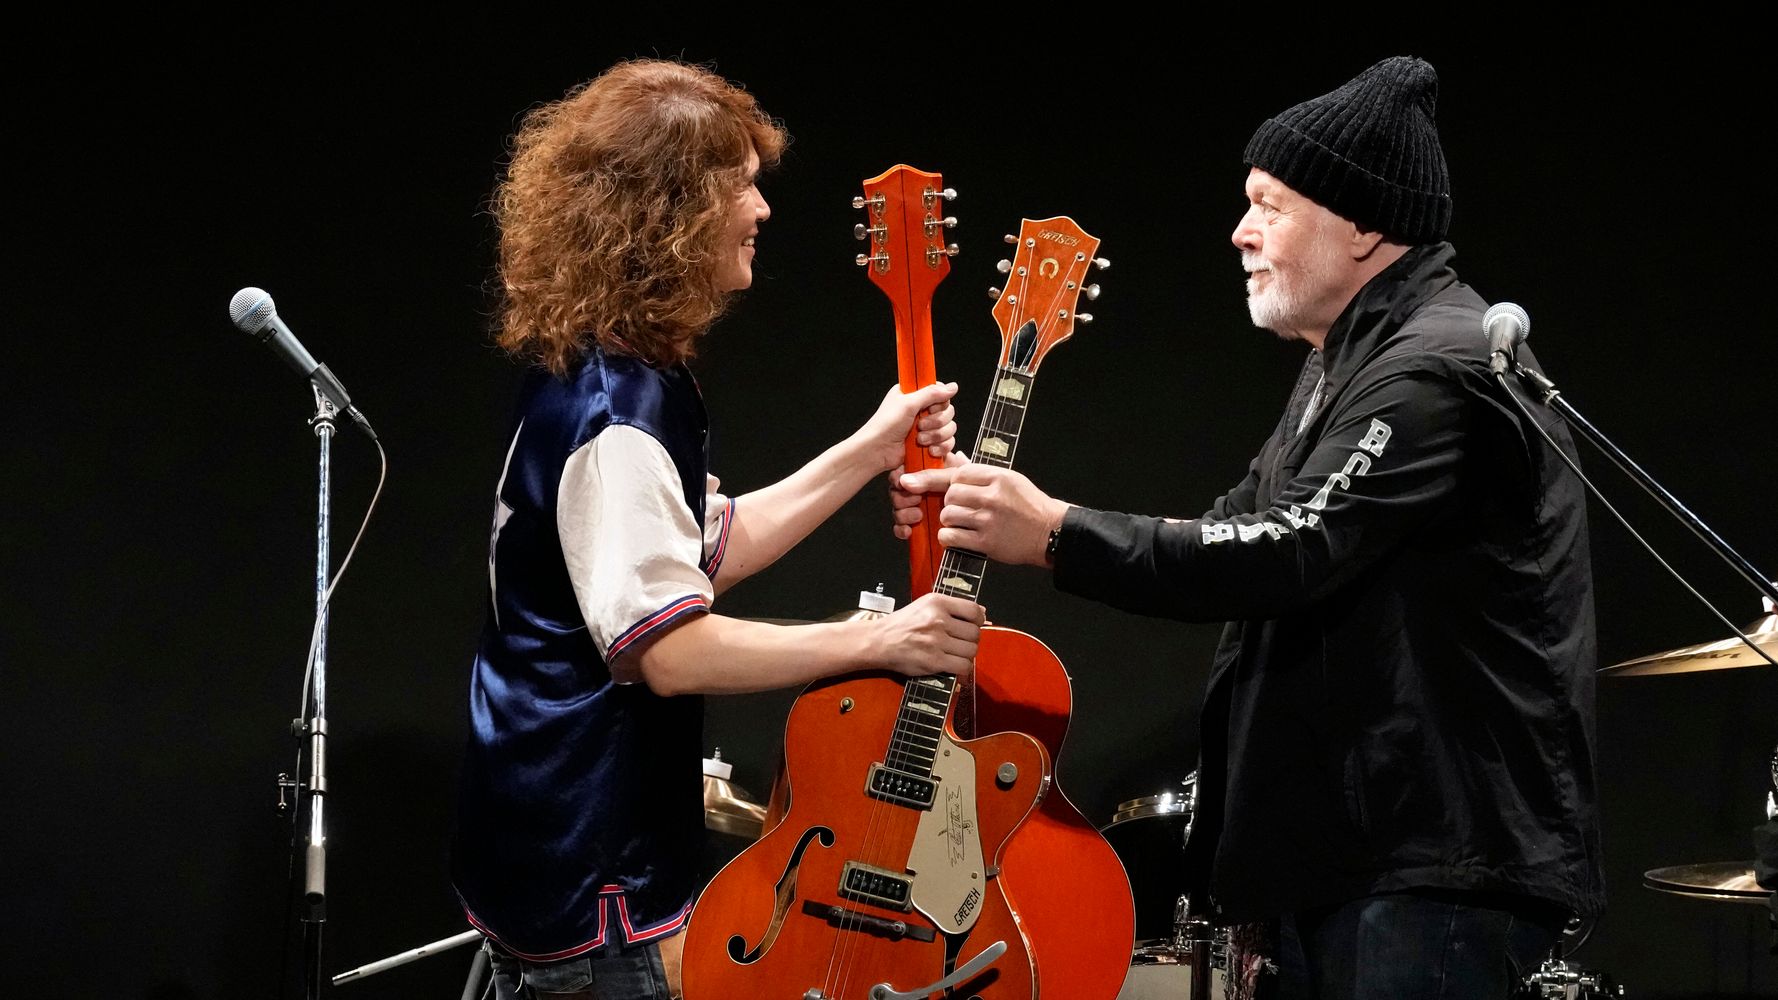 Rock Star Randy Bachman Reunited With Beloved Stolen Guitar After 45 Long Years